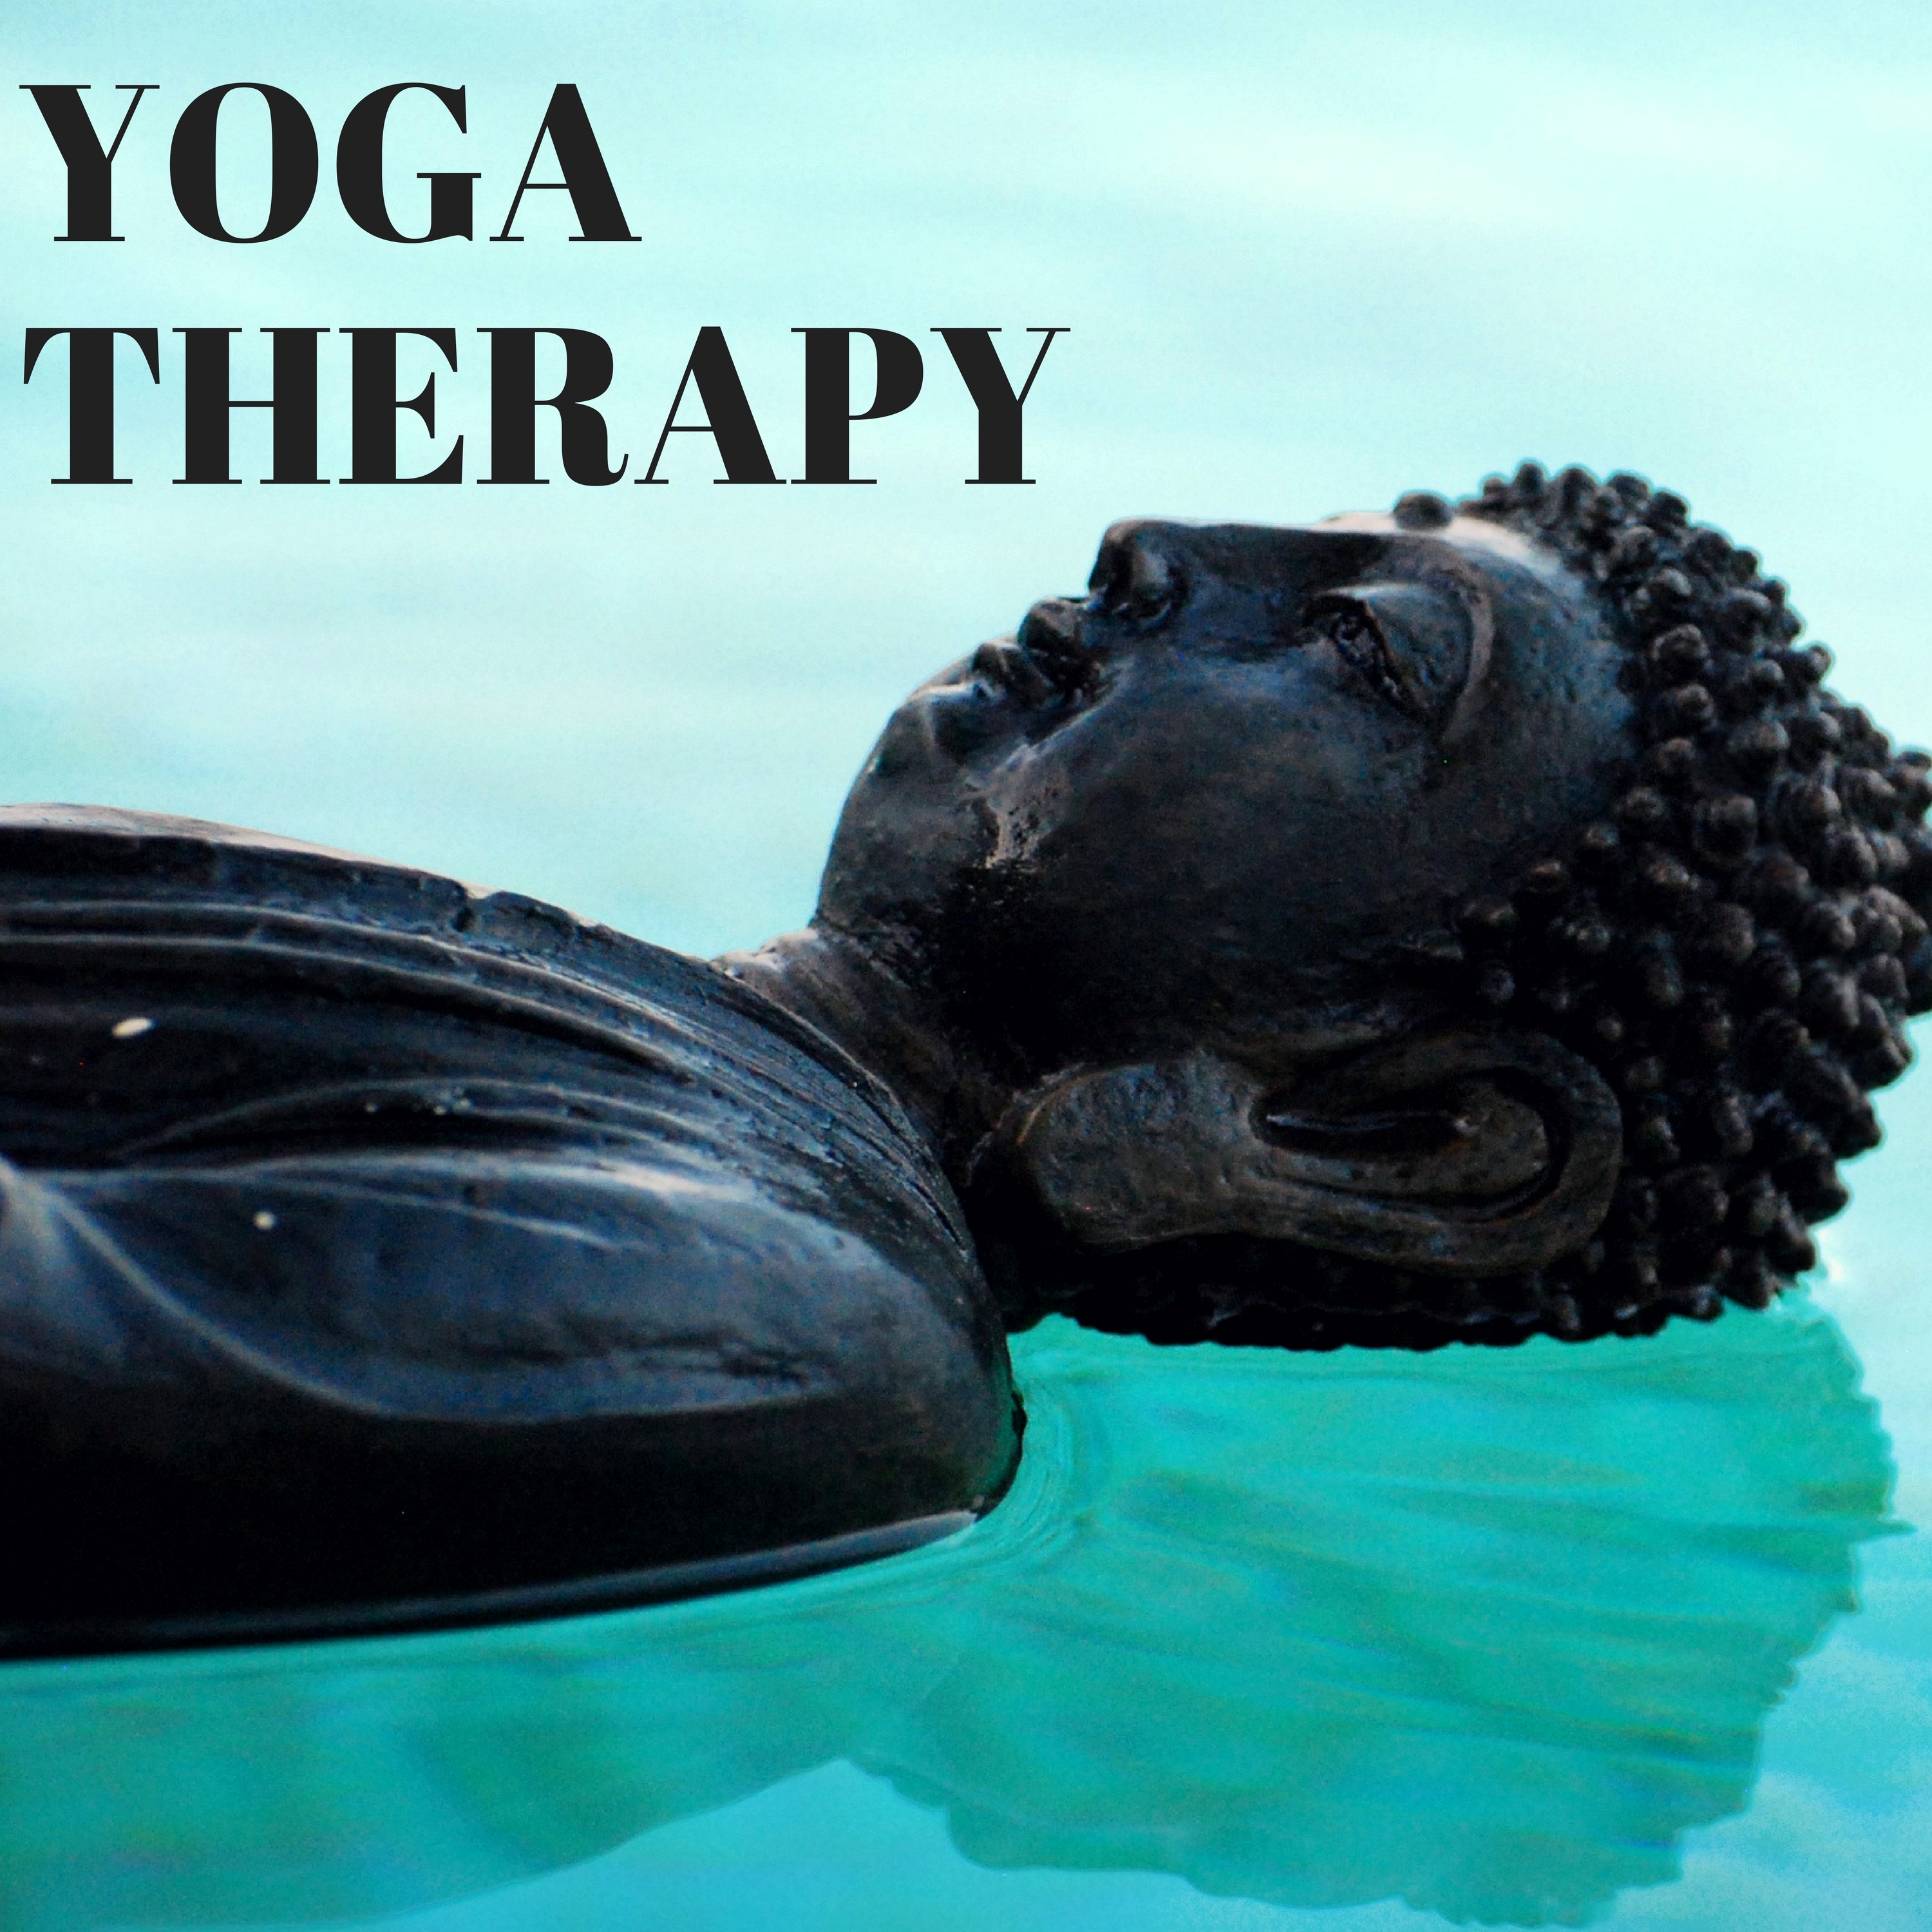 Yoga Therapy - Yoga Music for Spiritual Practices, Relax, Concentration and Meditation